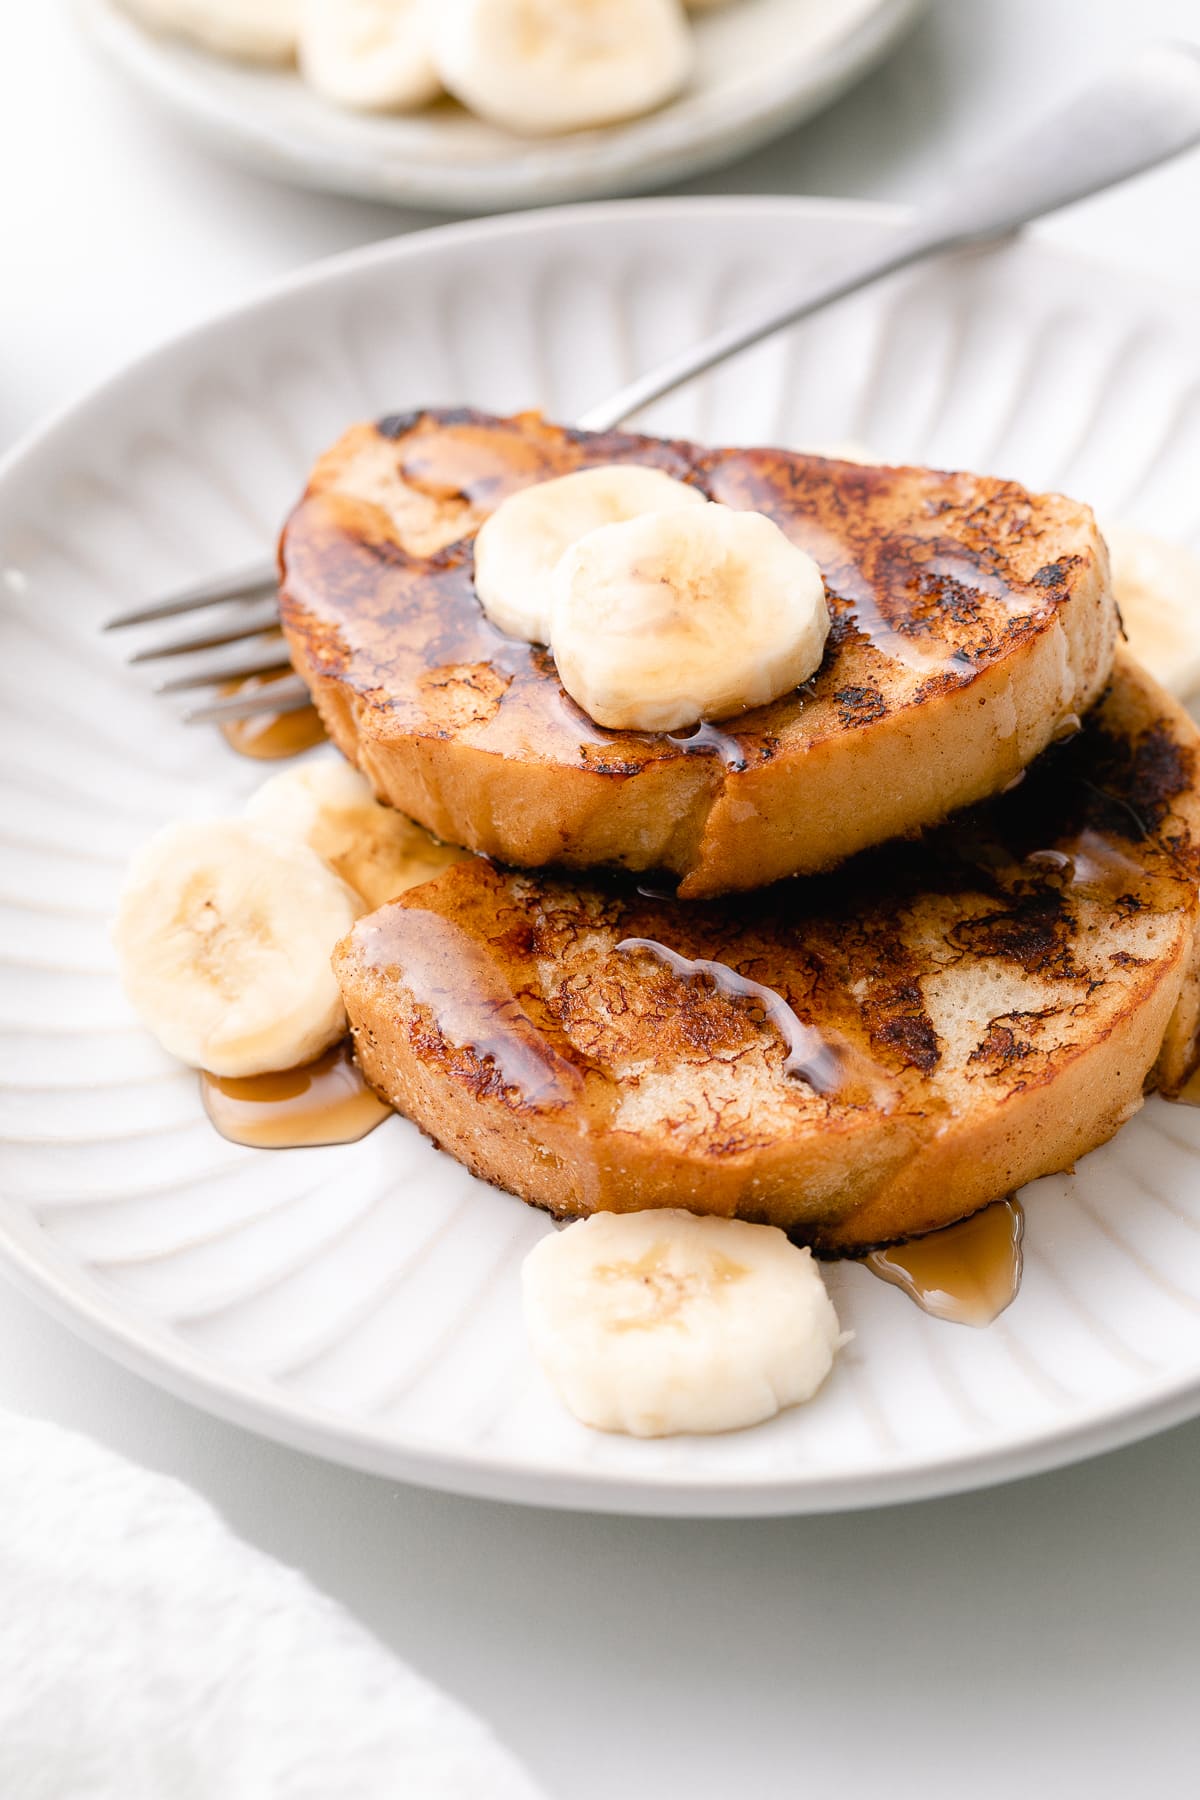 side angle view of vegan banana french toast on a plate with items surrounding.